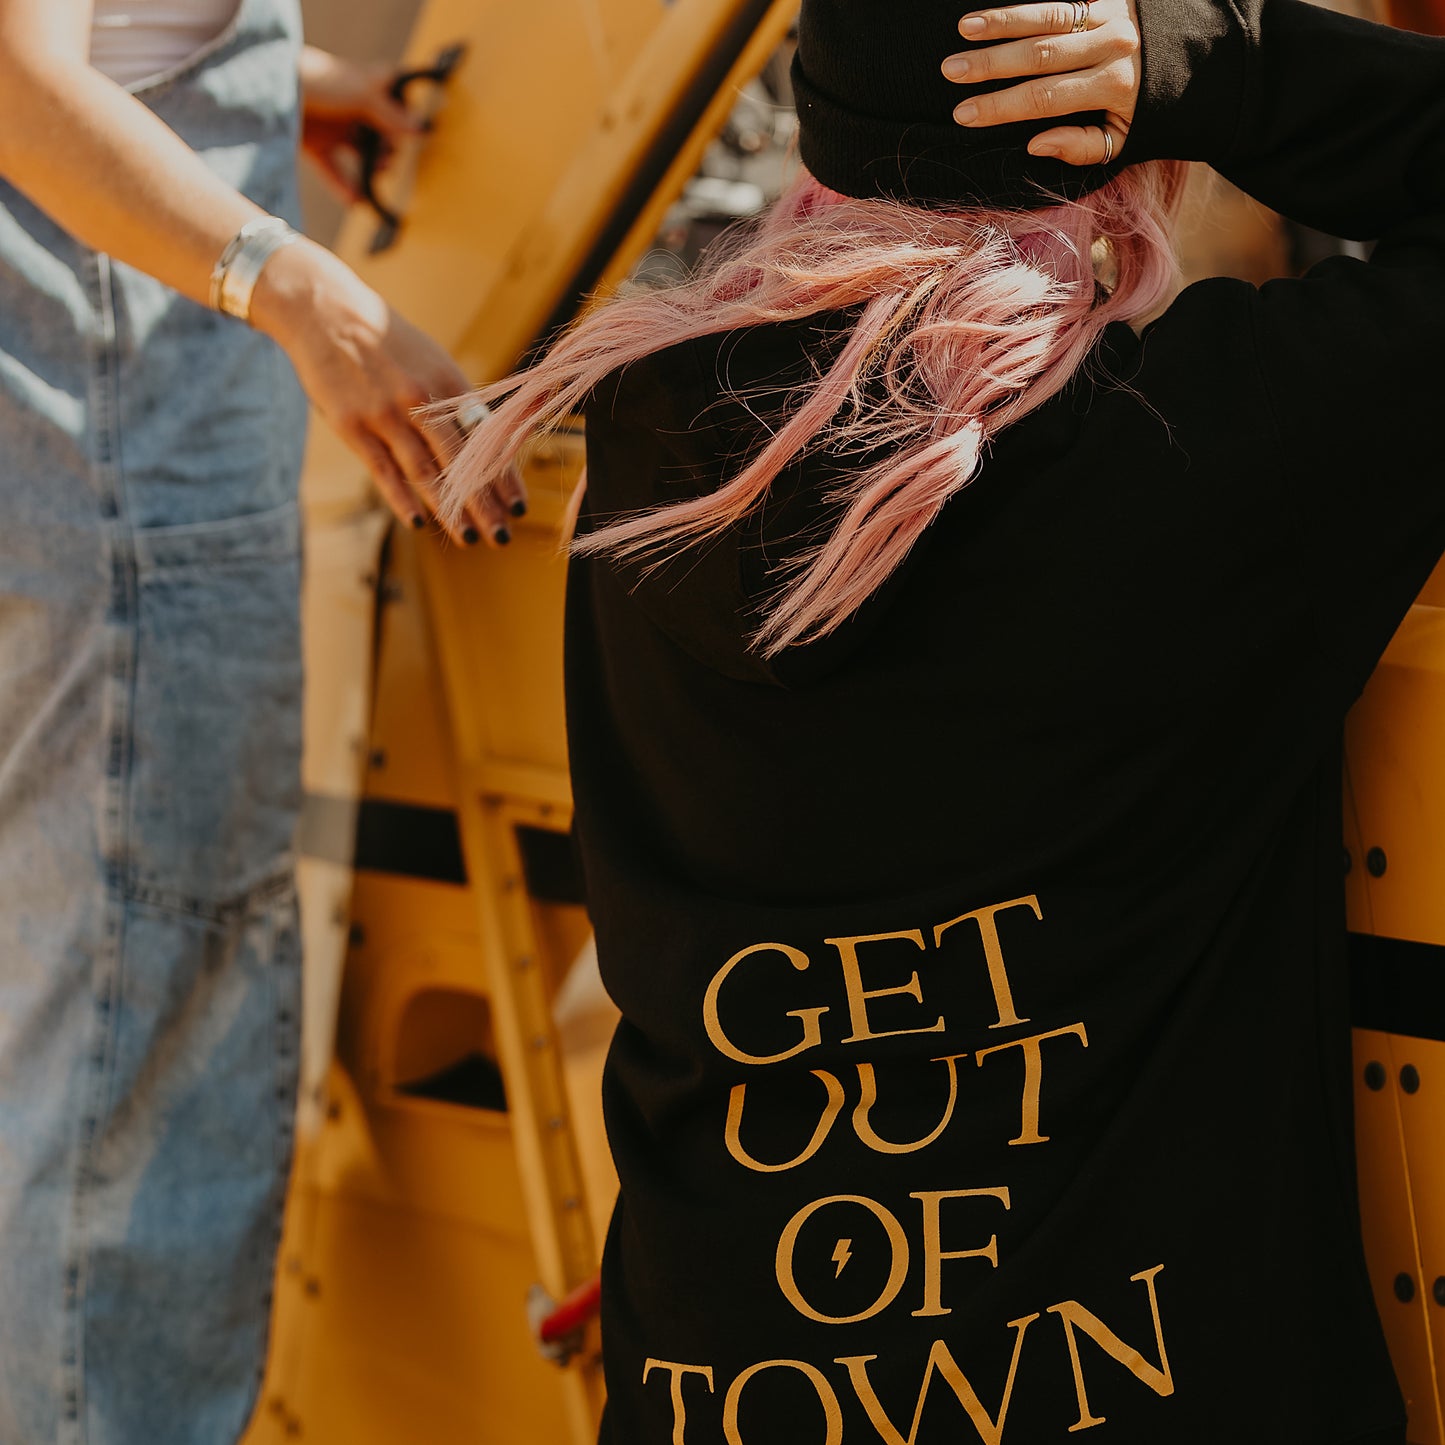 GET OUT OF TOWN - UNISEX HOODIE